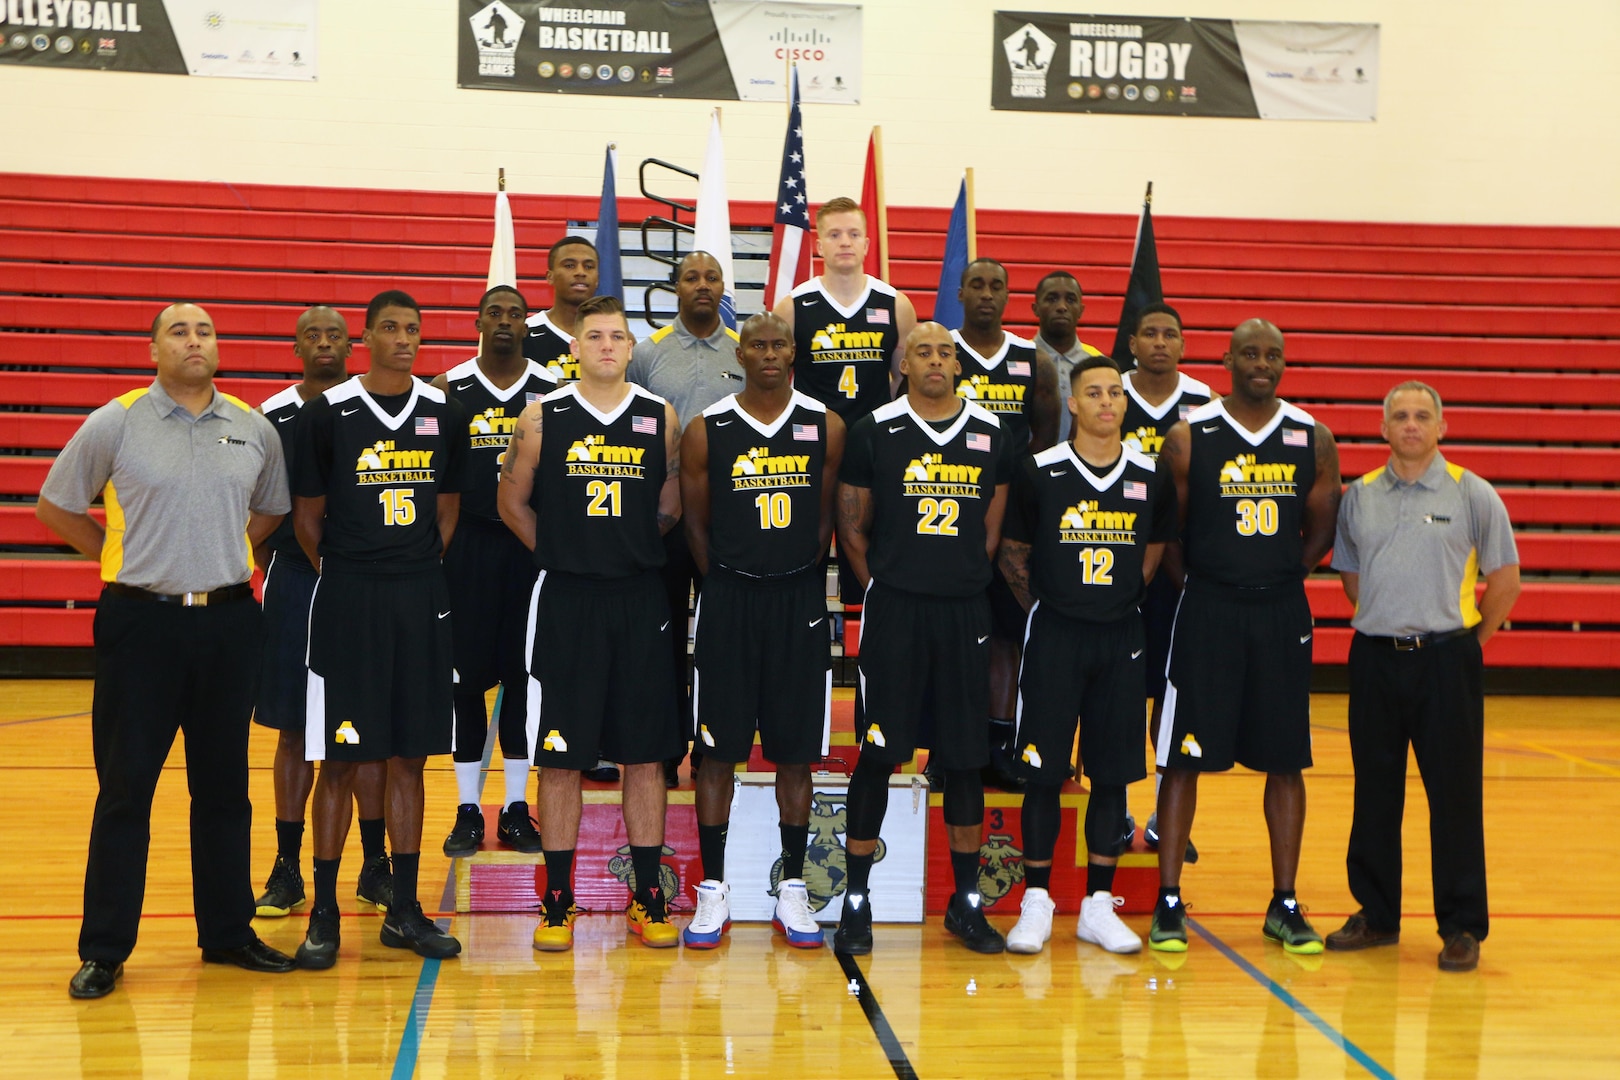 U.S. All-Army Men's Basketball Team.  The 2016 Armed Forces Men's Basketball Championship held at MCB Quantico, Va. from 1-7 November.  The best two teams during the doubel round robin will face each other for the 2016 Armed Forces crown.  